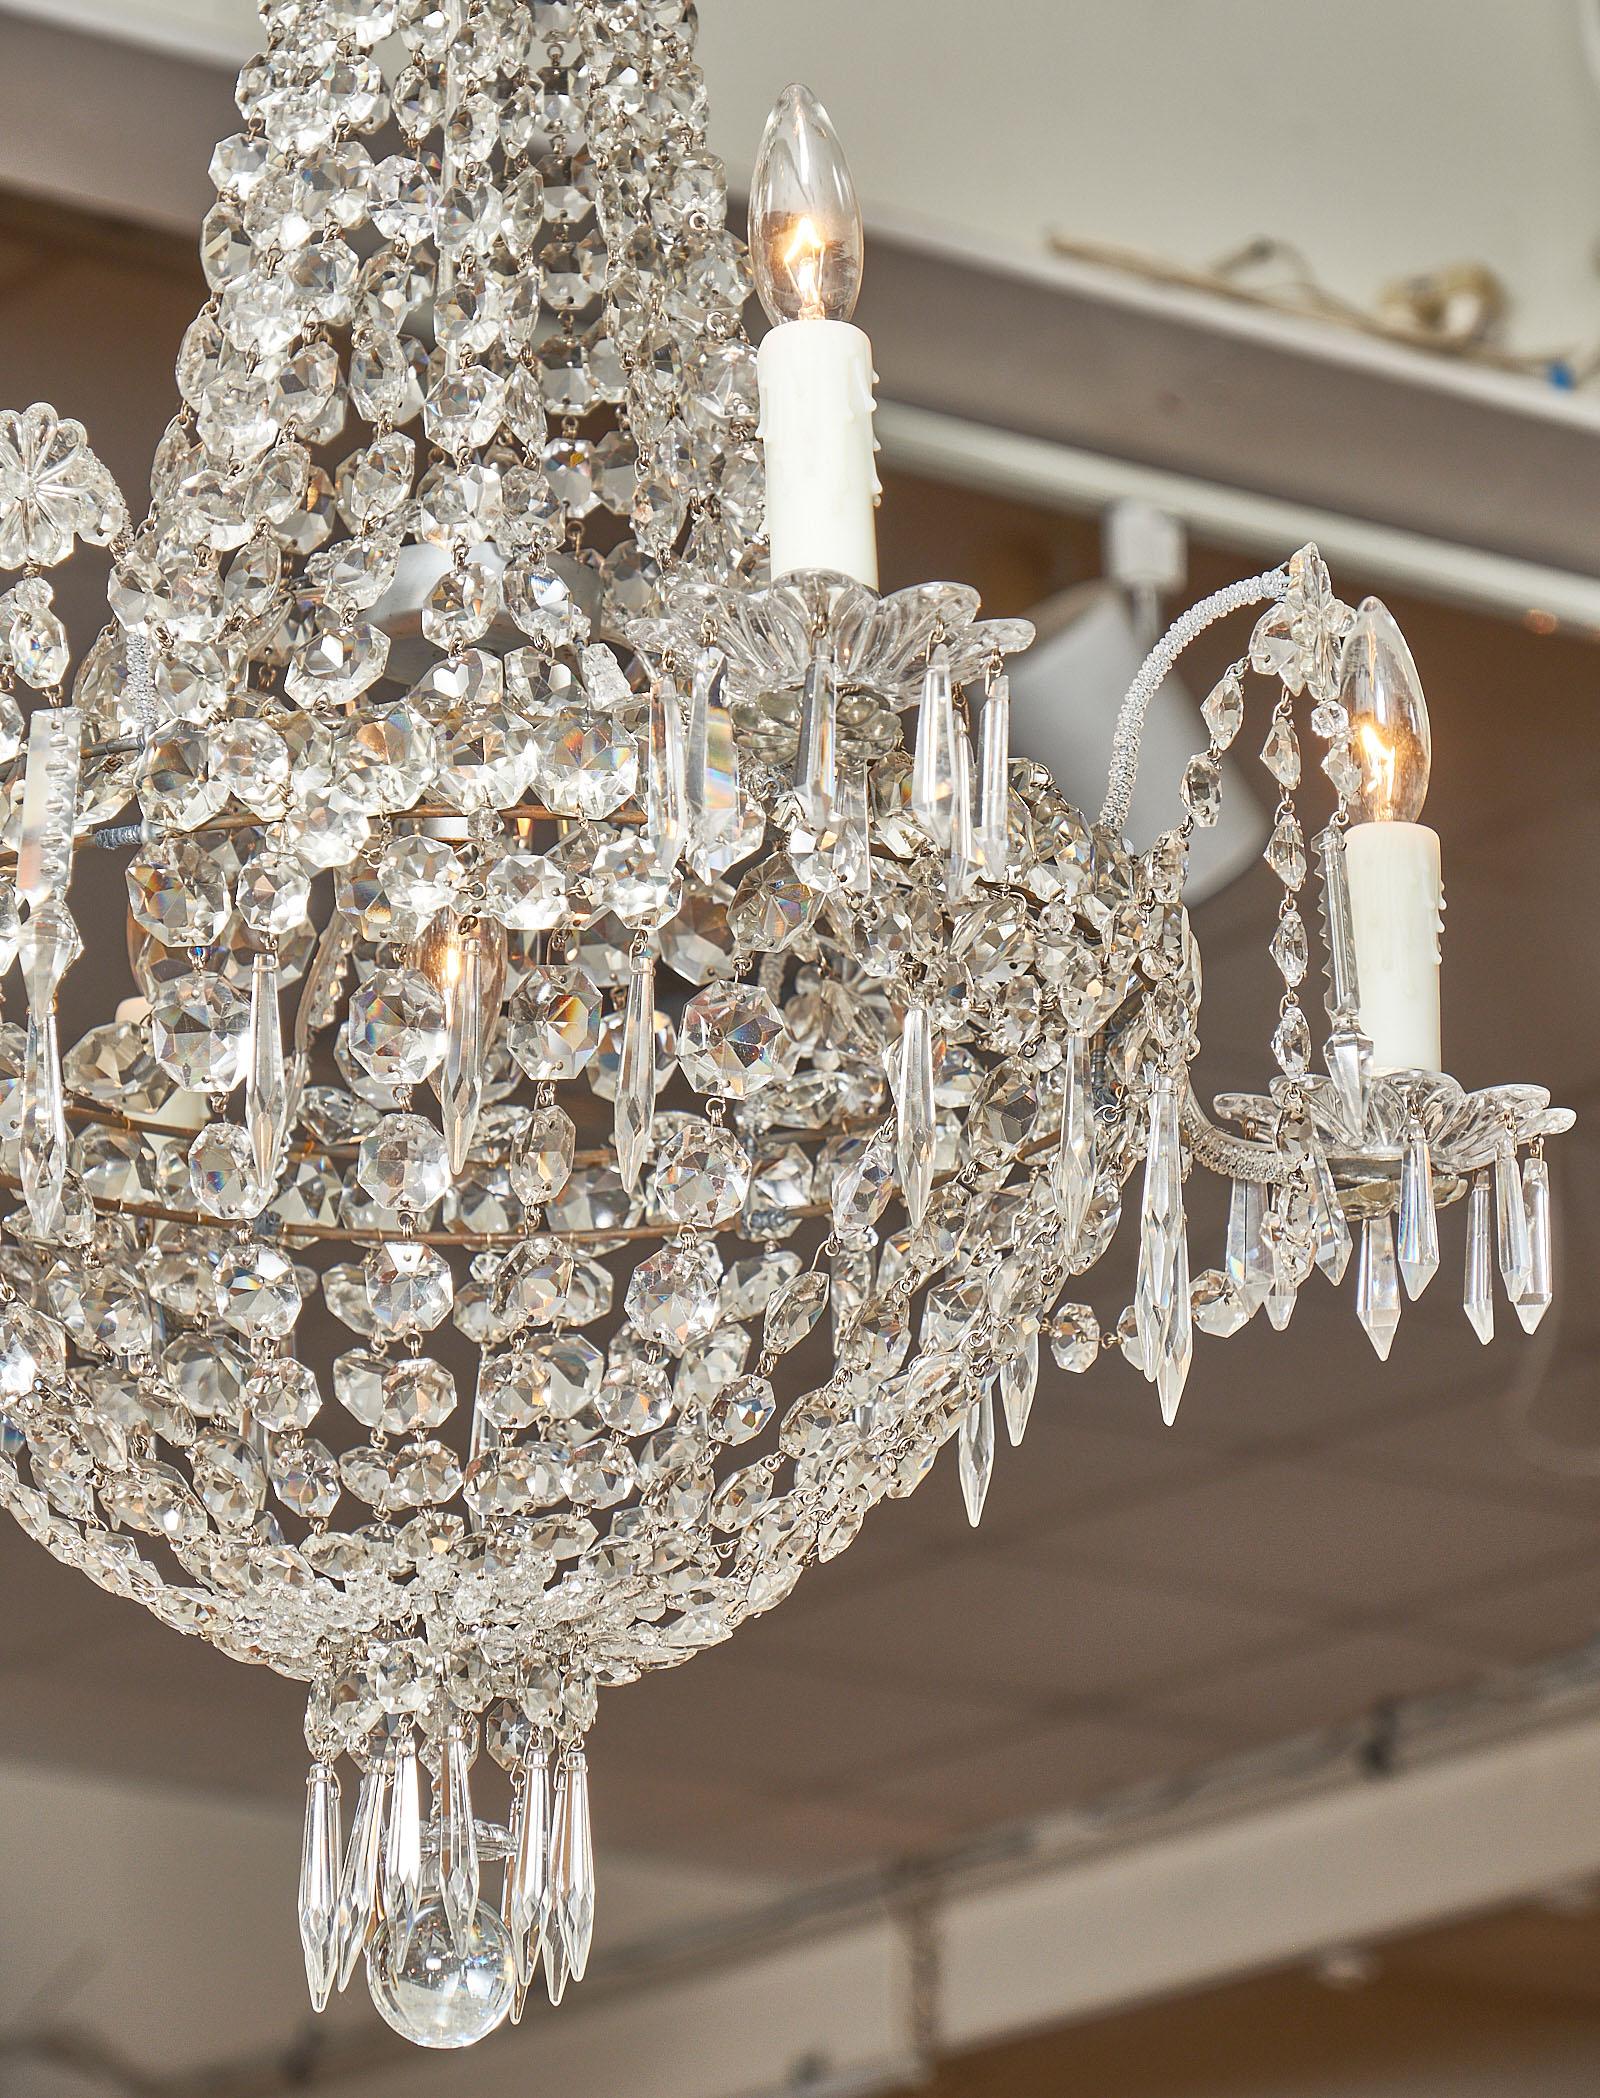 Early 20th Century French Empire Style Crystal Chandelier